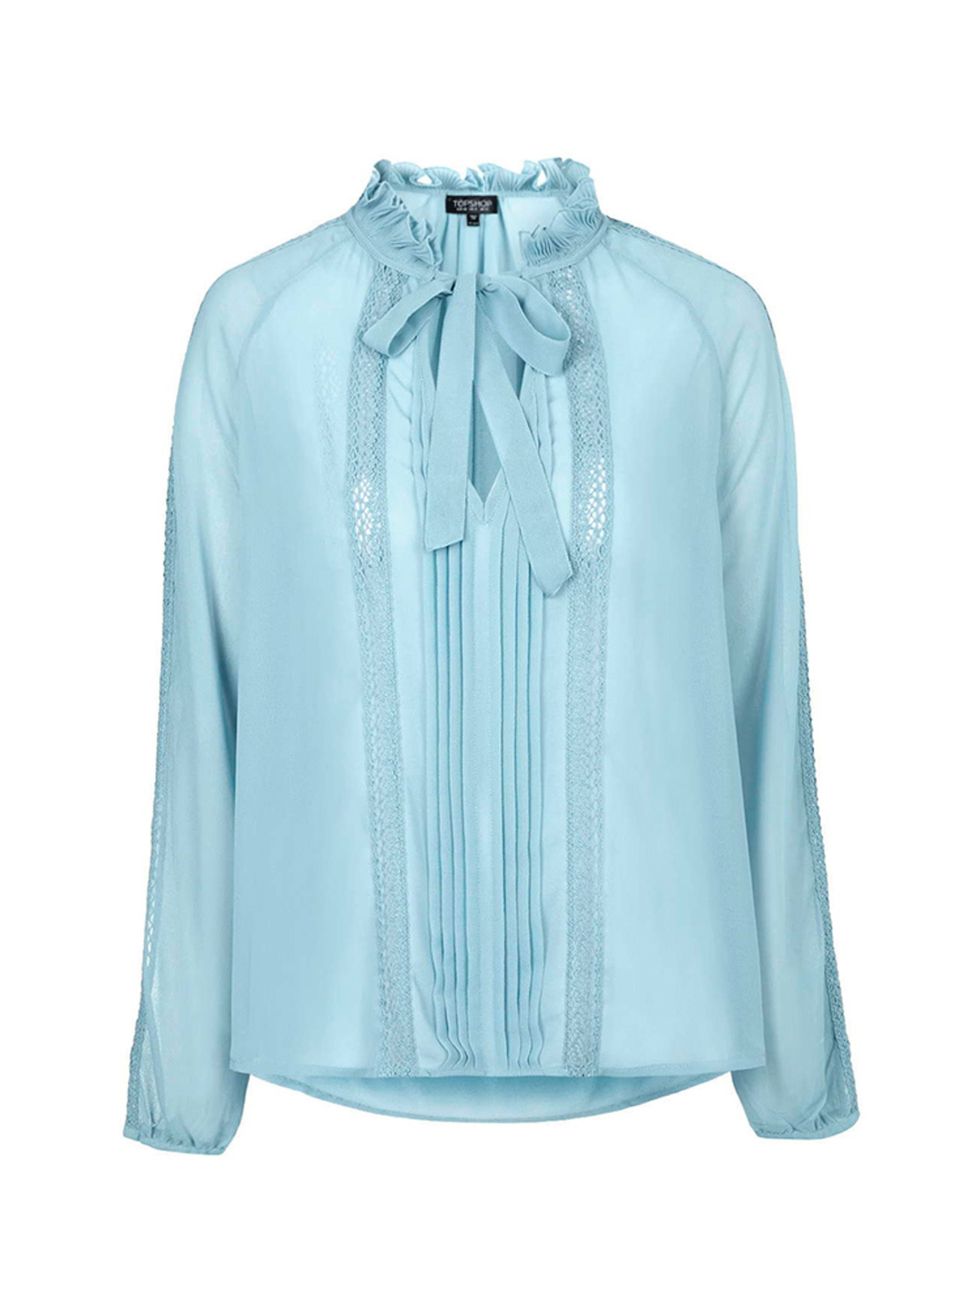 <p><a href="http://www.topshop.com/en/tsuk/product/new-in-this-week-2169932/new-in-this-week-493/semi-sheer-lace-insert-blouse-4632866?bi=0&ps=20" target="_blank">Topshop</a> shirt, £40</p>